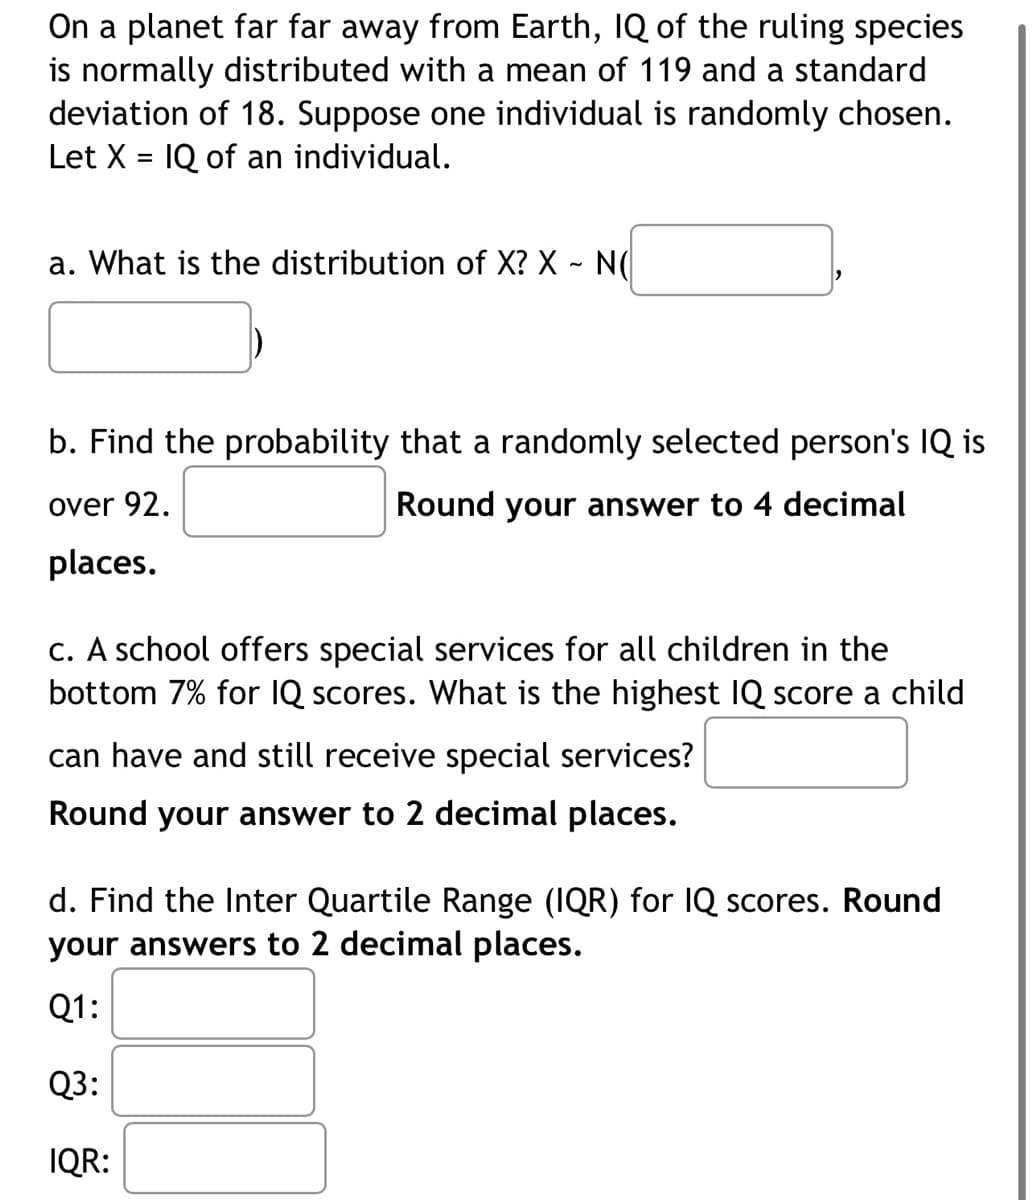 On a planet far far away from Earth, IQ of the ruling species
is normally distributed with a mean of 119 and a standard
deviation of 18. Suppose one individual is randomly chosen.
Let X = IQ of an individual.
a. What is the distribution of X? X - N(
b. Find the probability that a randomly selected person's IQ is
over 92.
Round your answer to 4 decimal
places.
c. A school offers special services for all children in the
bottom 7% for IQ scores. What is the highest IQ score a child
can have and still receive special services?
Round your answer to 2 decimal places.
d. Find the Inter Quartile Range (IQR) for IQ scores. Round
your answers to 2 decimal places.
Q1:
Q3:
IQR: